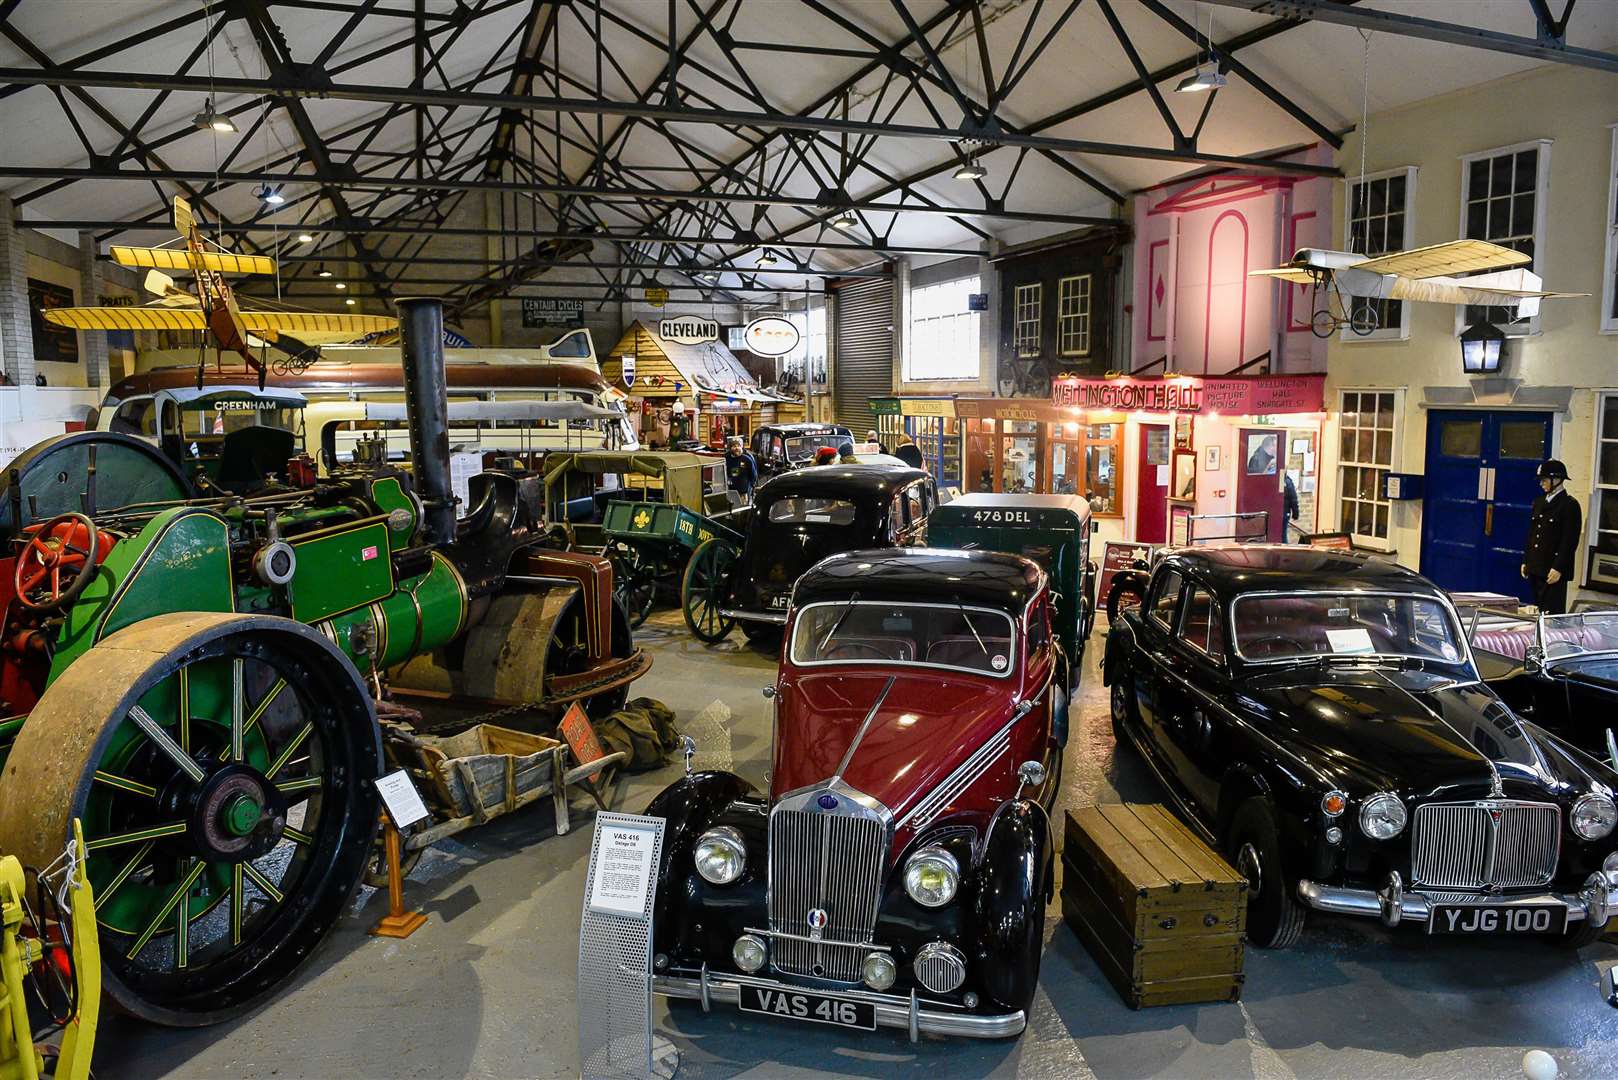 The main hall is packed with exhibits, in pride of place, the rare Delage D6 stands next to a 1960s Rover P5